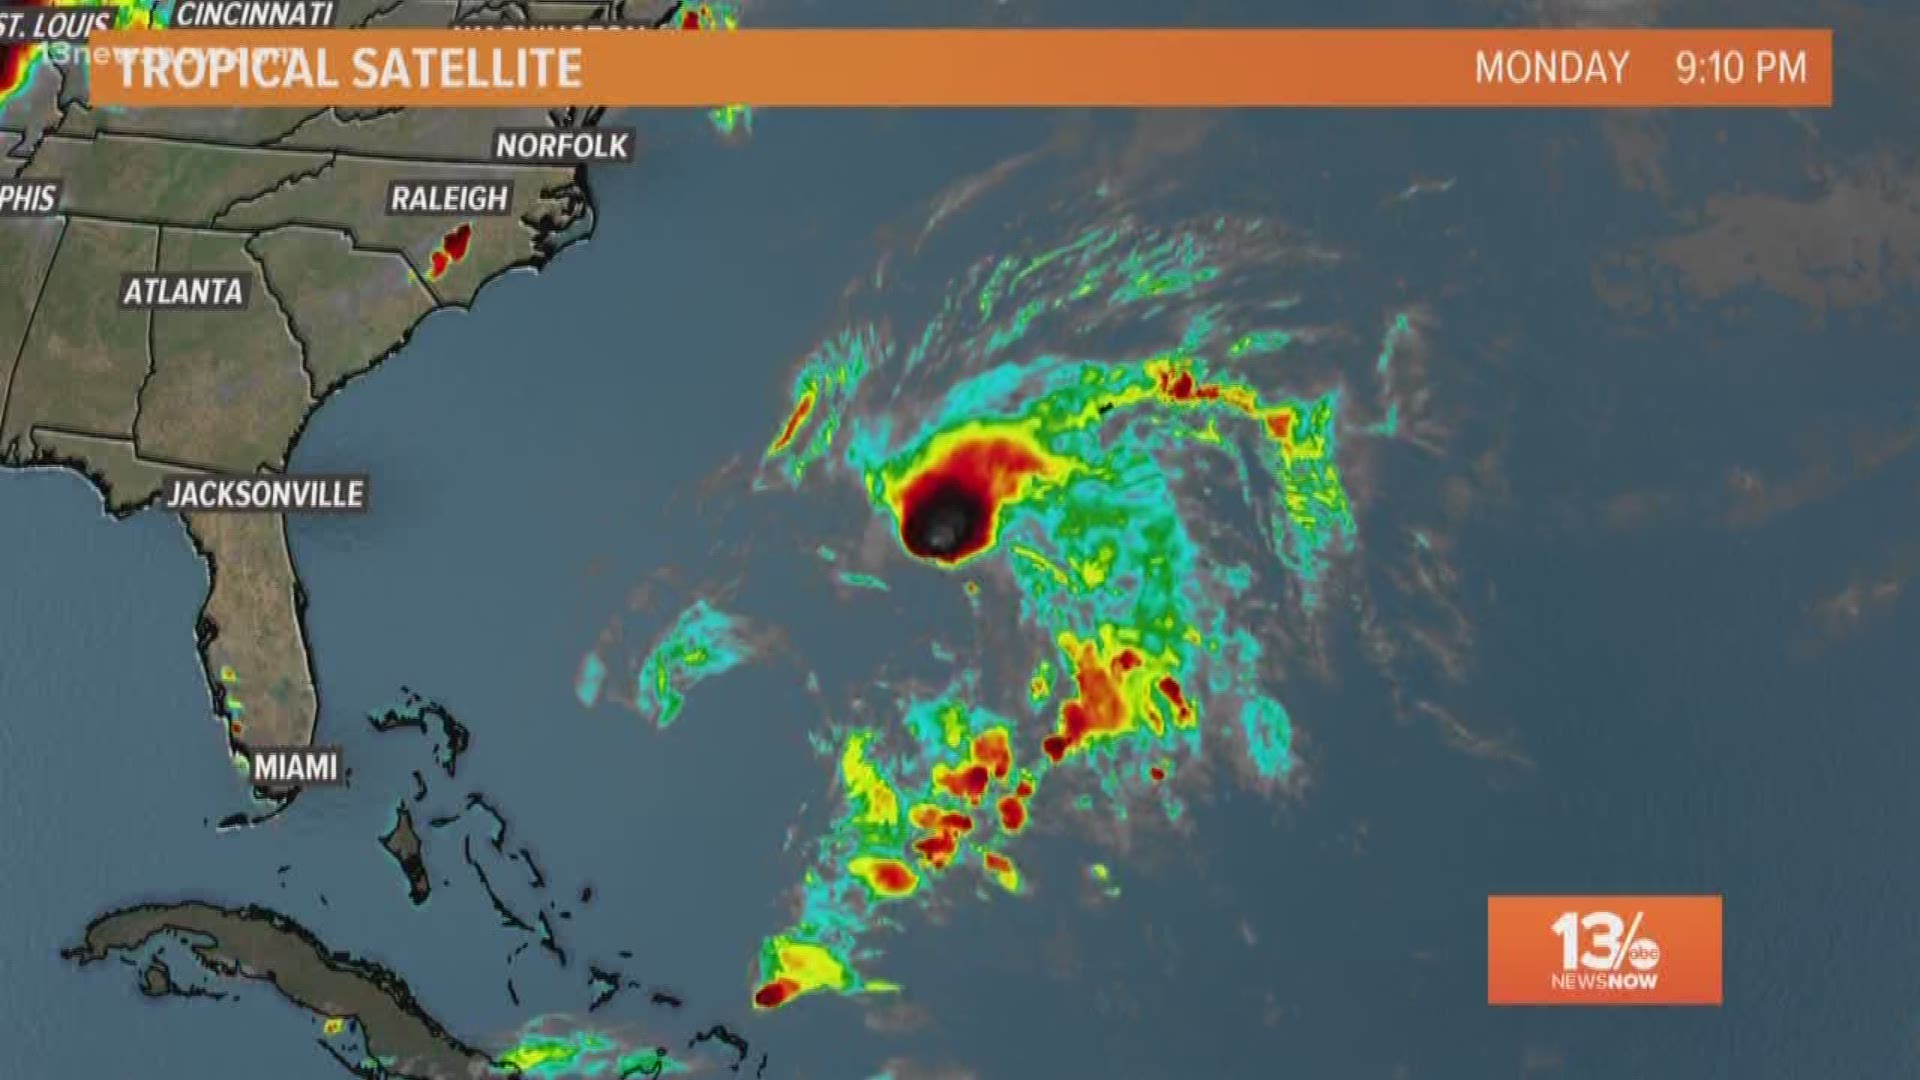 The first named storm of 2019 comes a few weeks before the official start of the Atlantic Hurricane Season.